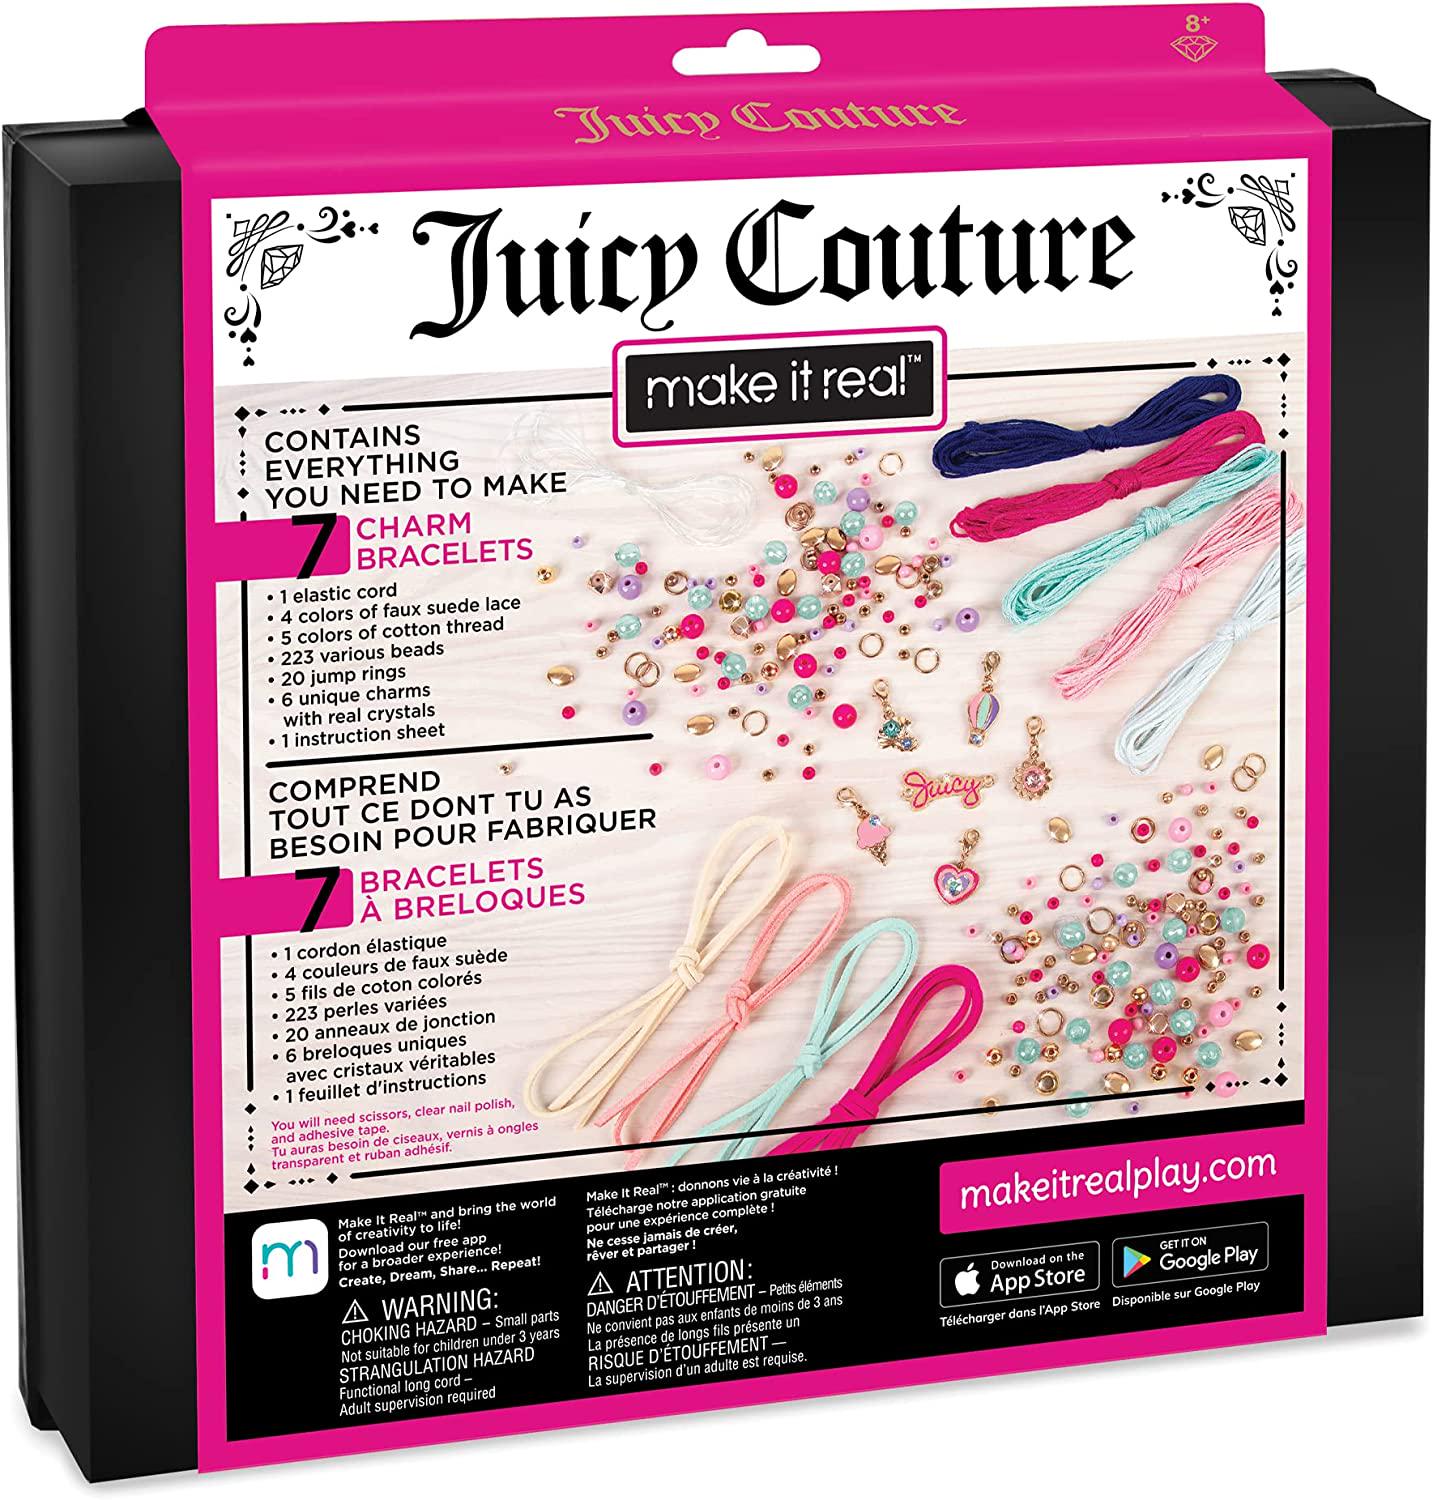 Make It Real, Make It Real Juicy Couture Crystal Sunshine Bracelets - DIY Charm Bracelet Kit for Teen Girls - Jewelry Making Supplies with Beads and Charms with Swarovski Crystals